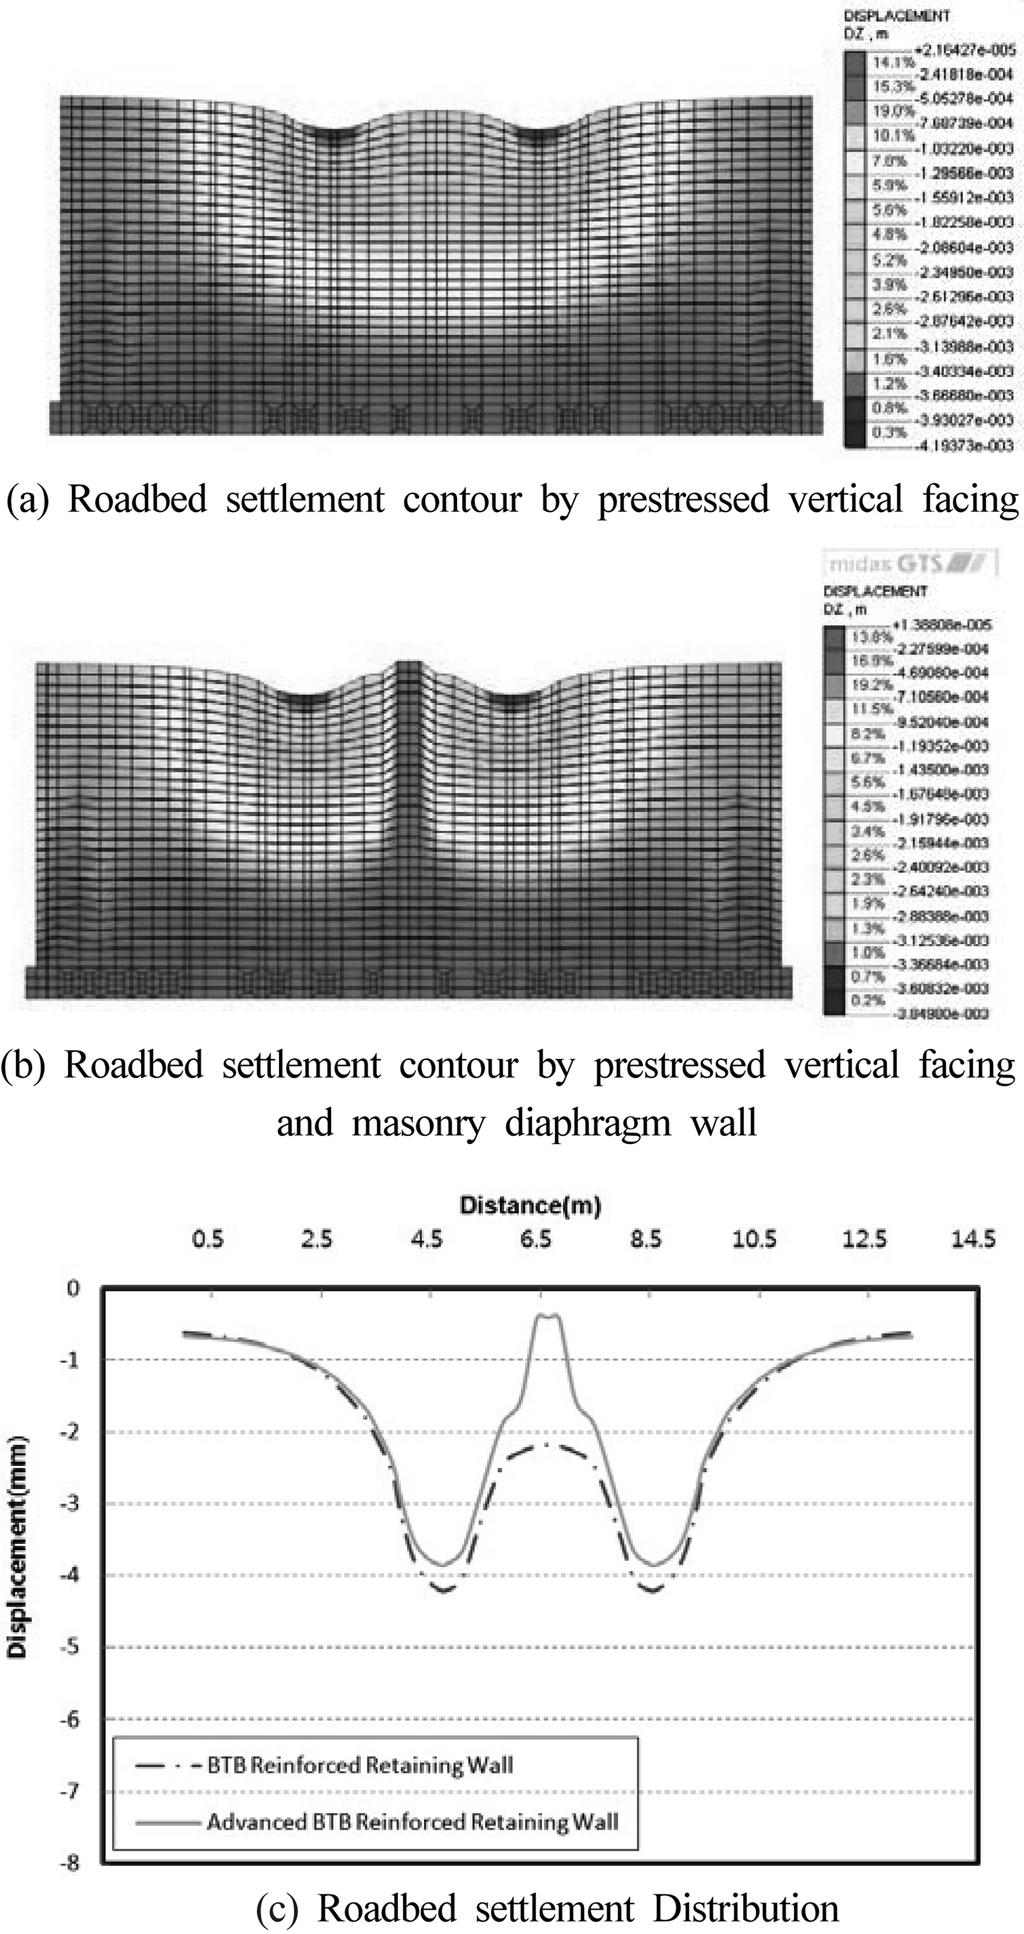 The reduction of roadbed settlement is expected by its bearing capacity increased due to the arching effects induced in roadbed. Based on the results of 2D numerical analysis as shown in Fig.